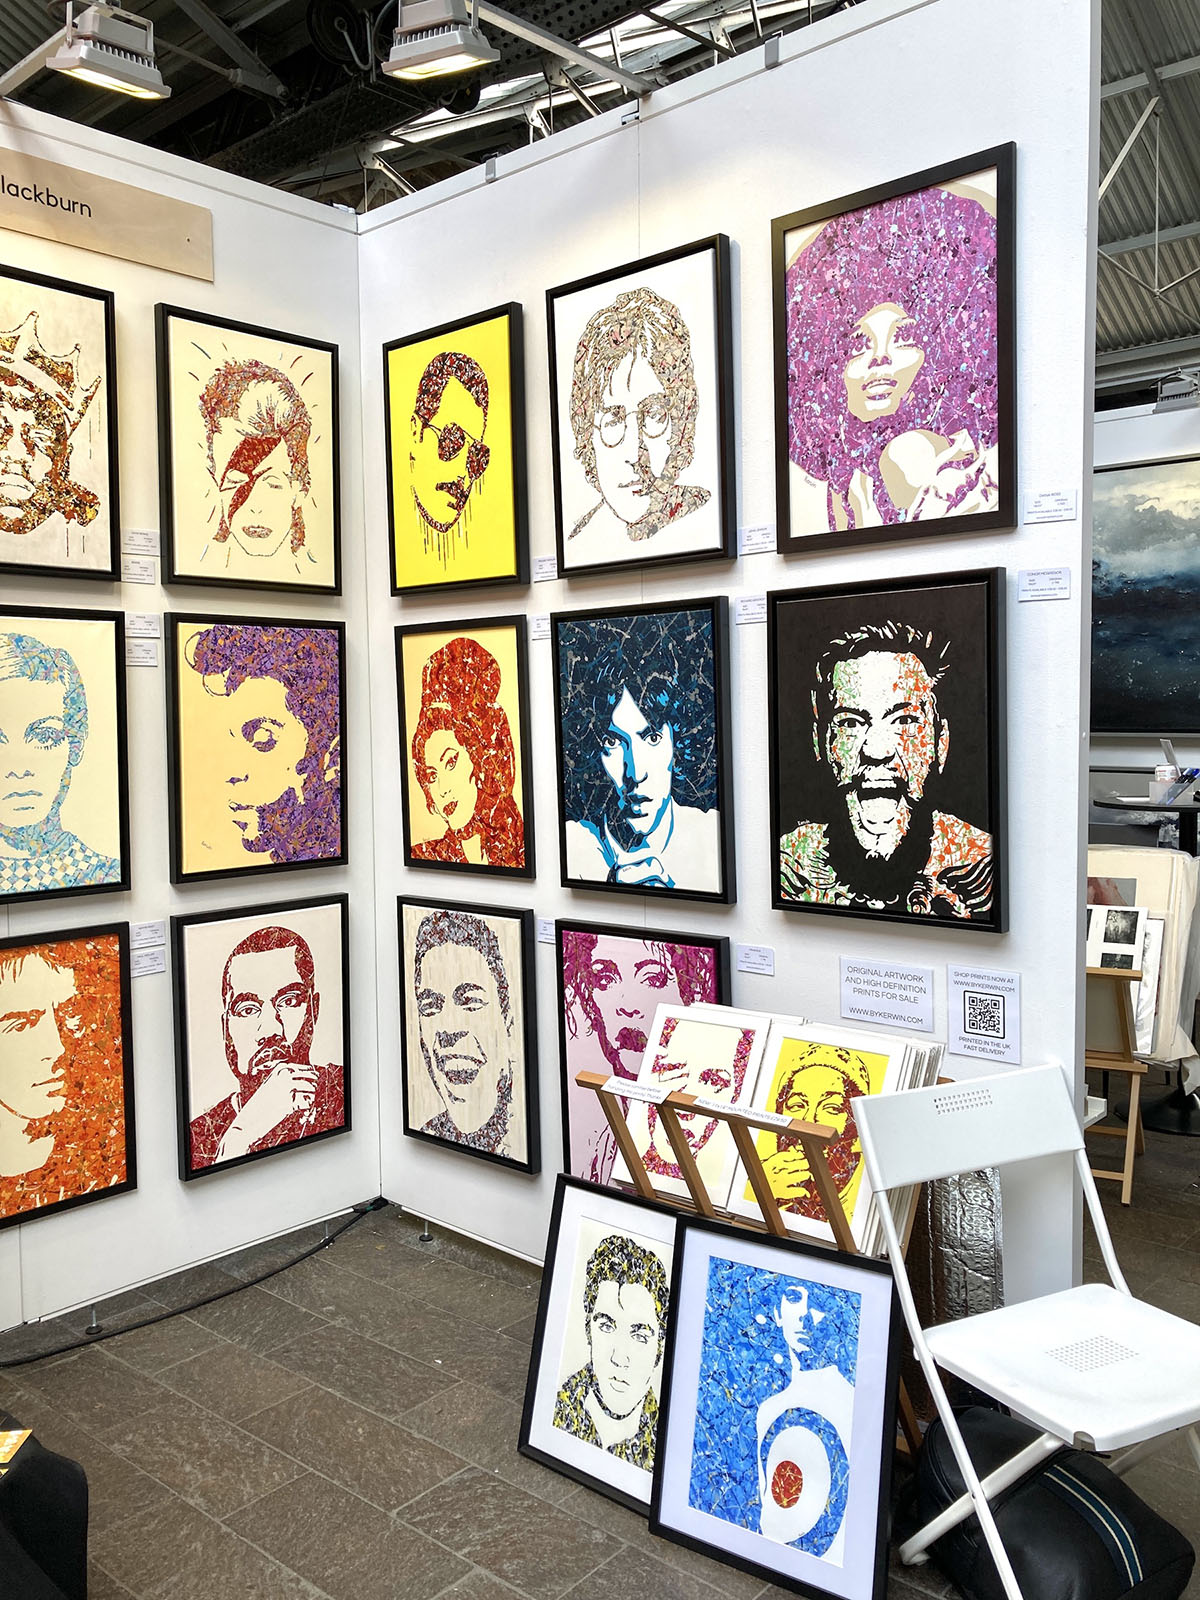 Kerwin Blackburn exhibiting his Jackson Pollock inspired pop art music paintings and prints at The Other Art Fair London, July 2021 | Richard Ashcroft | The Verve